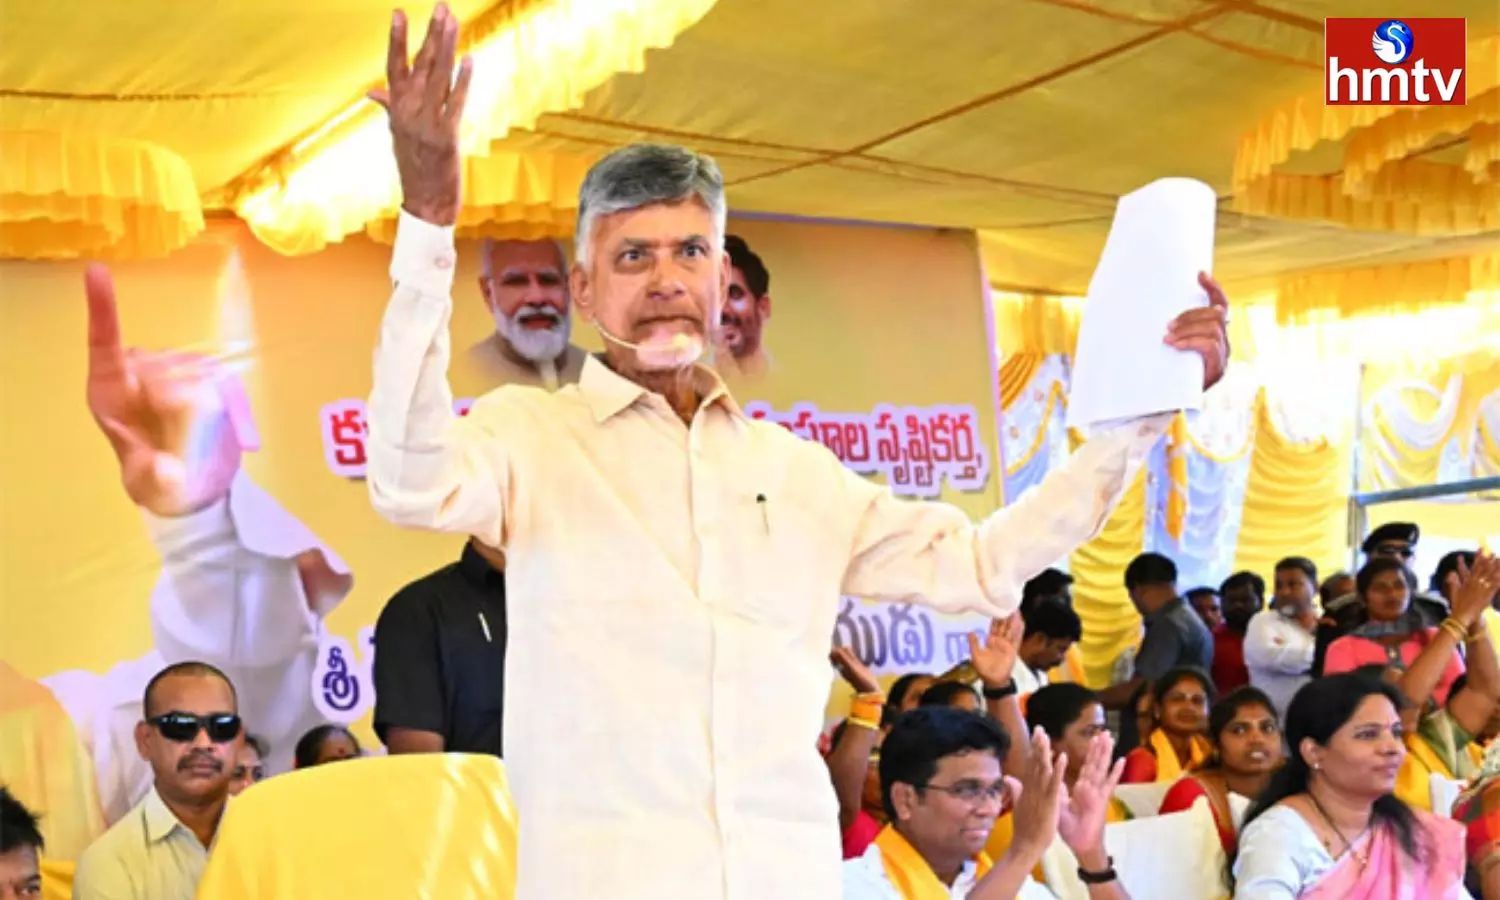 Ganja Crop Has Become Official In AP Says Chandrababu